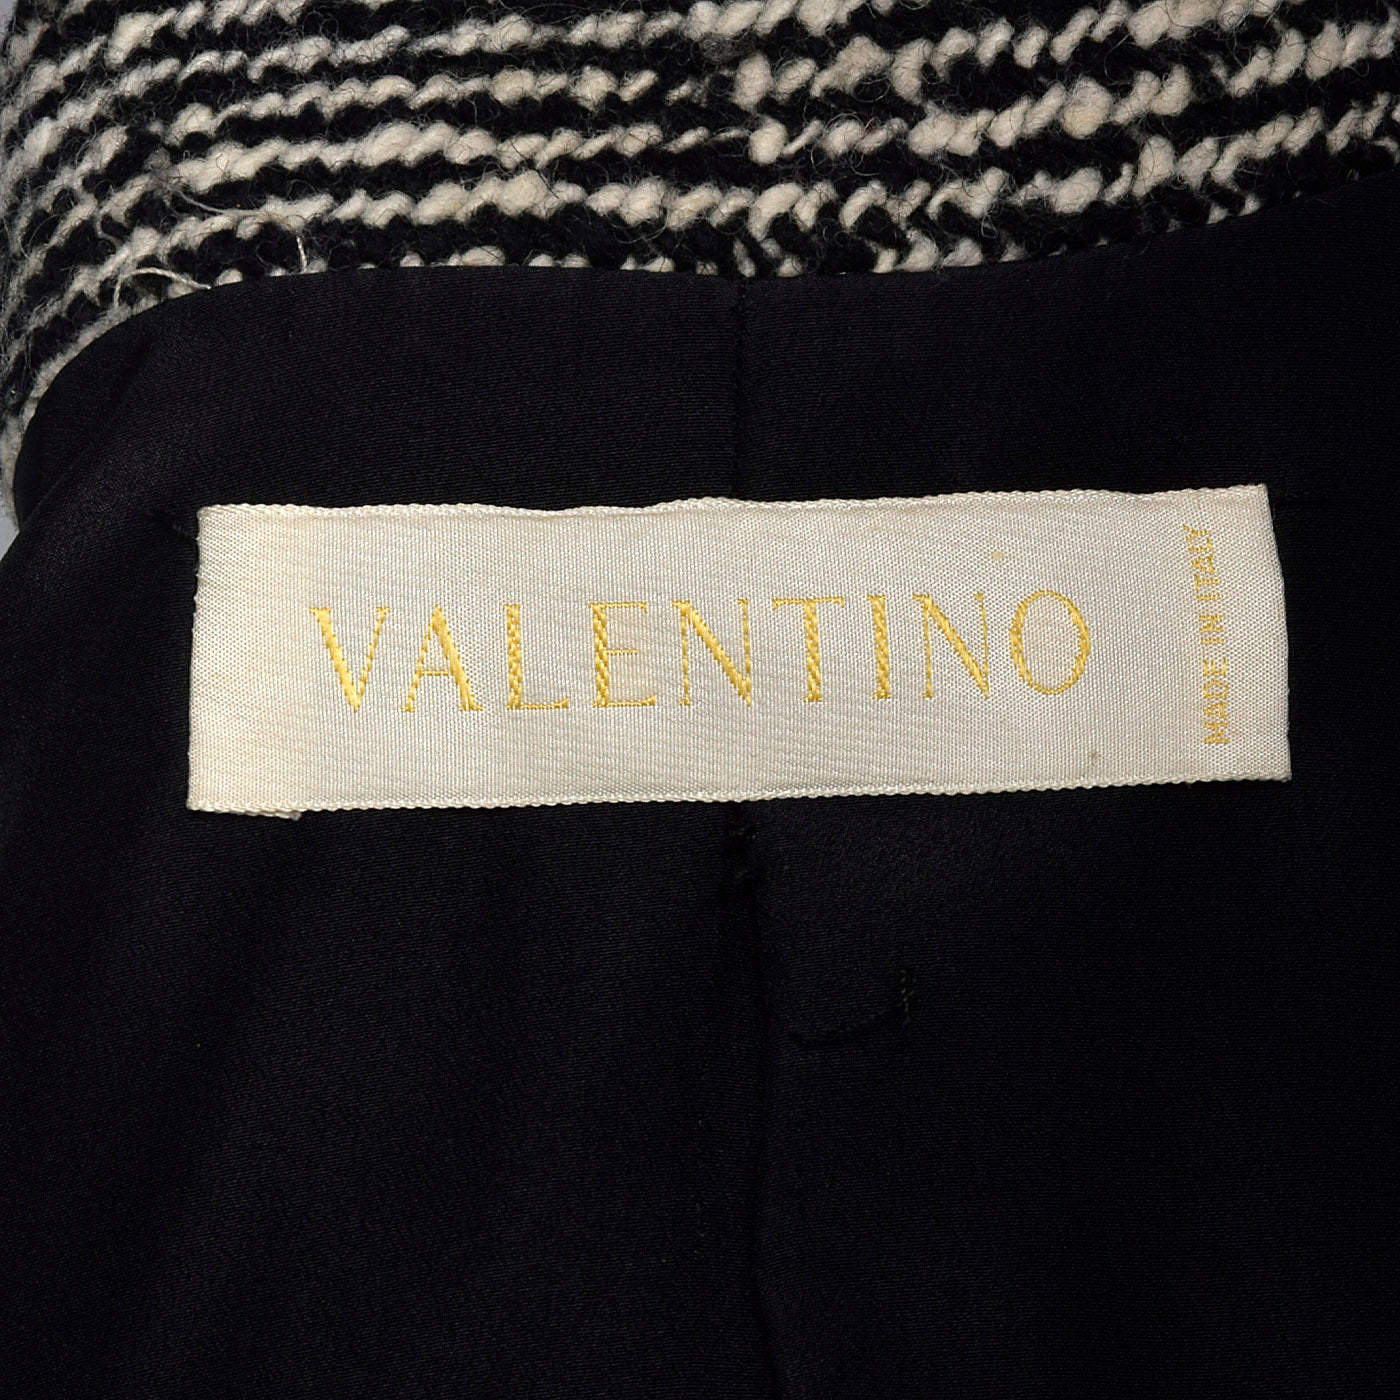 2000s Valentino Black and White Jacket with Belted Waist